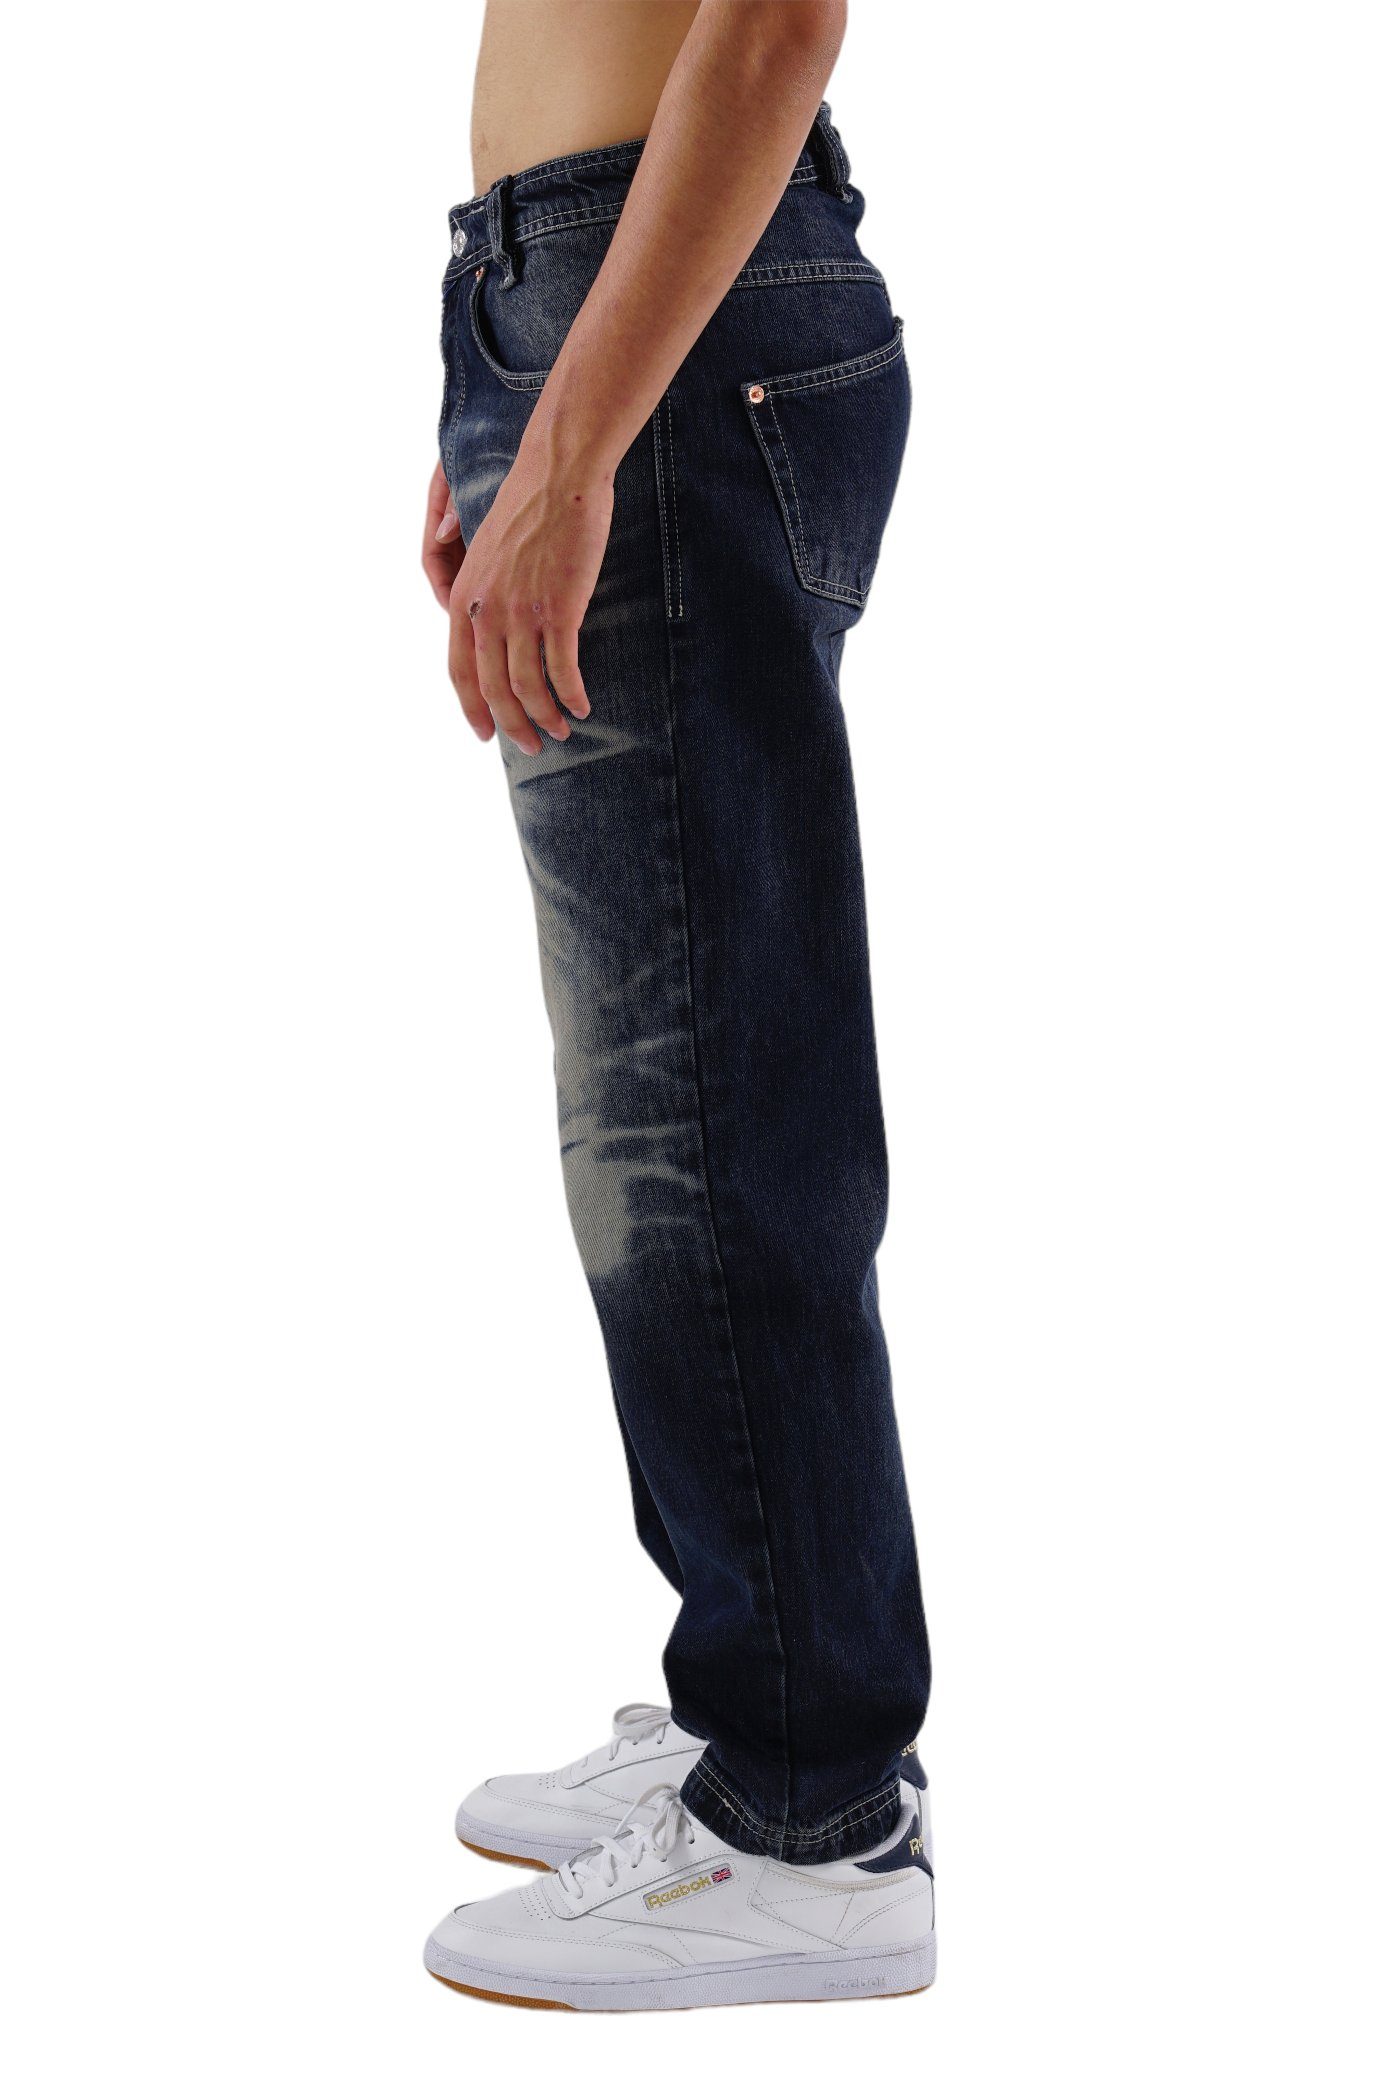 Loose Fit Jeans Eldorado 472 Jeans PICALDI Weite Fit, Relaxed Zicco